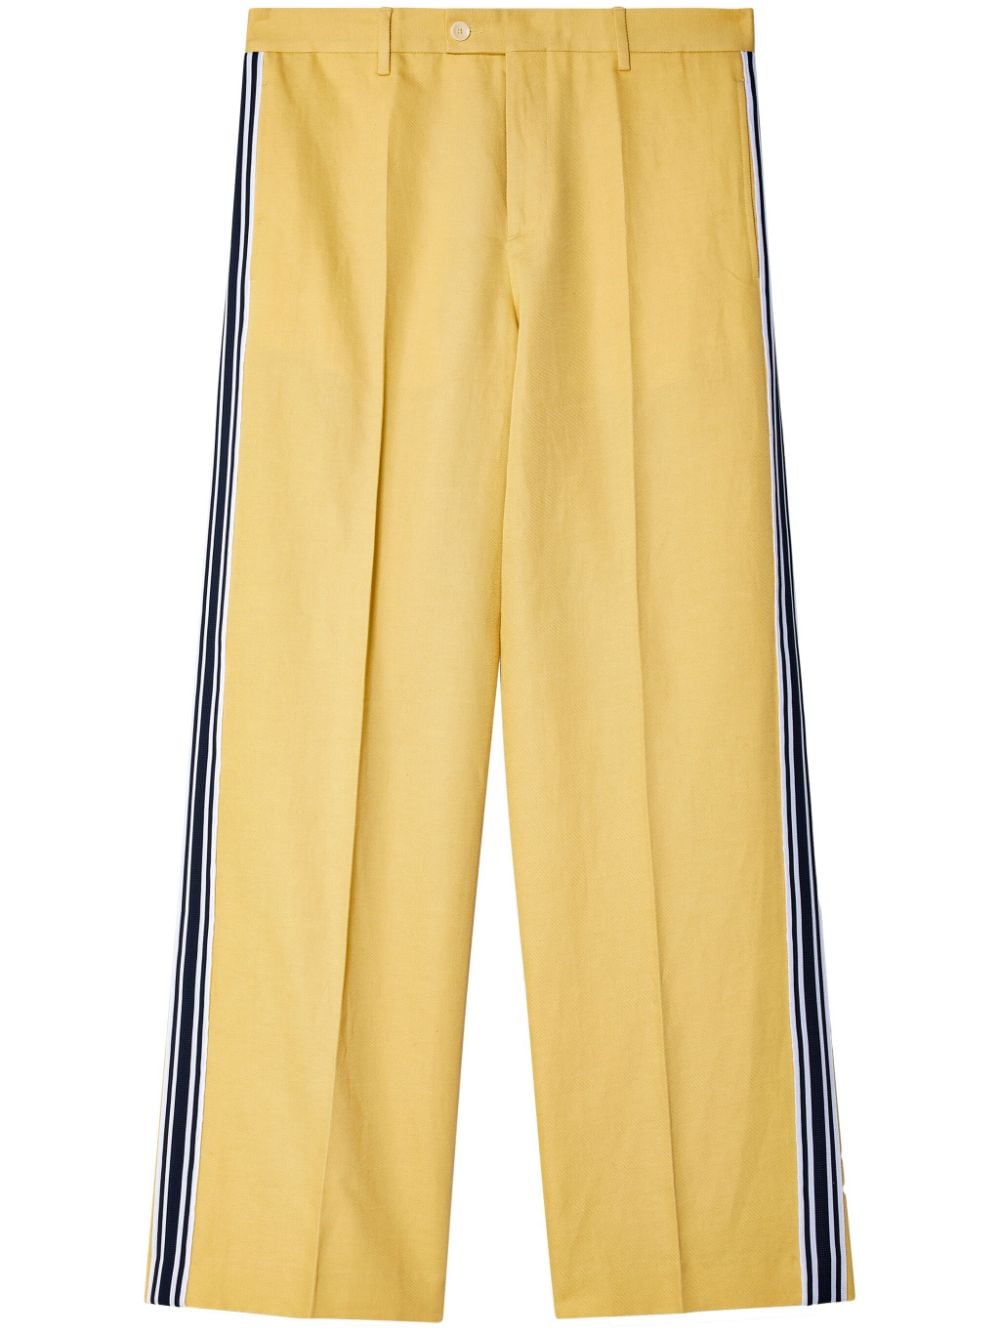 Constant straight-leg trousers